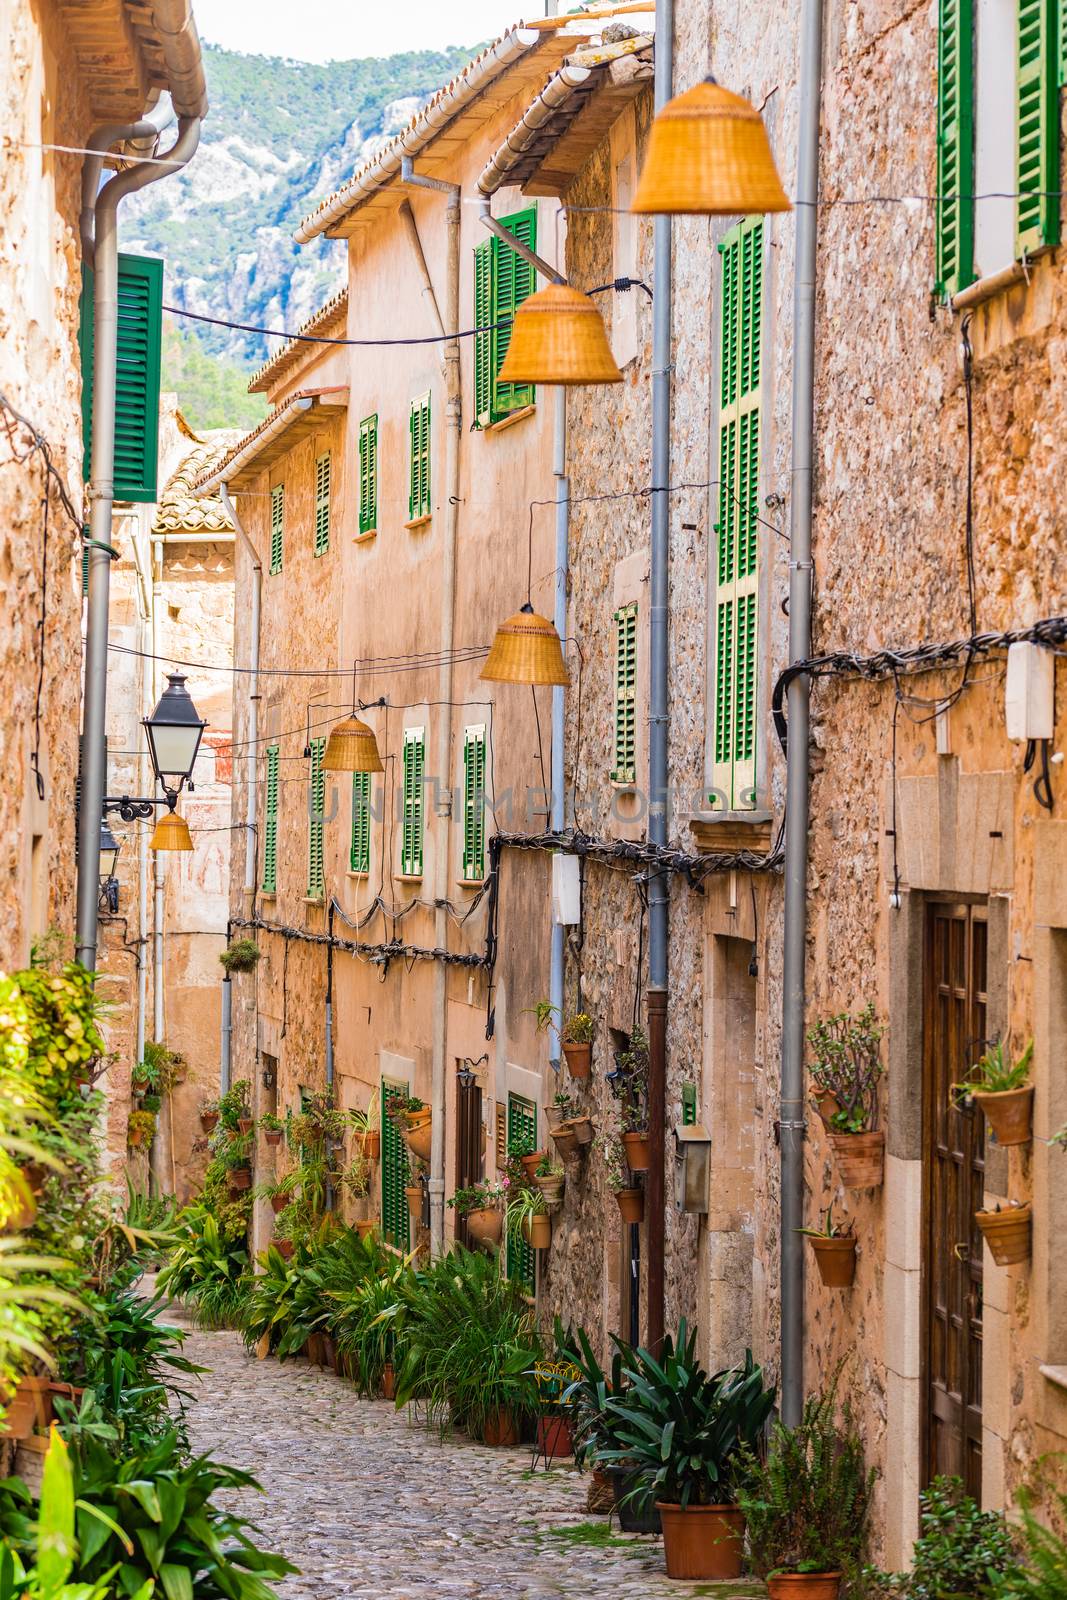 Majorca Spain, typical plant street in the old village Valldemossa  by Vulcano